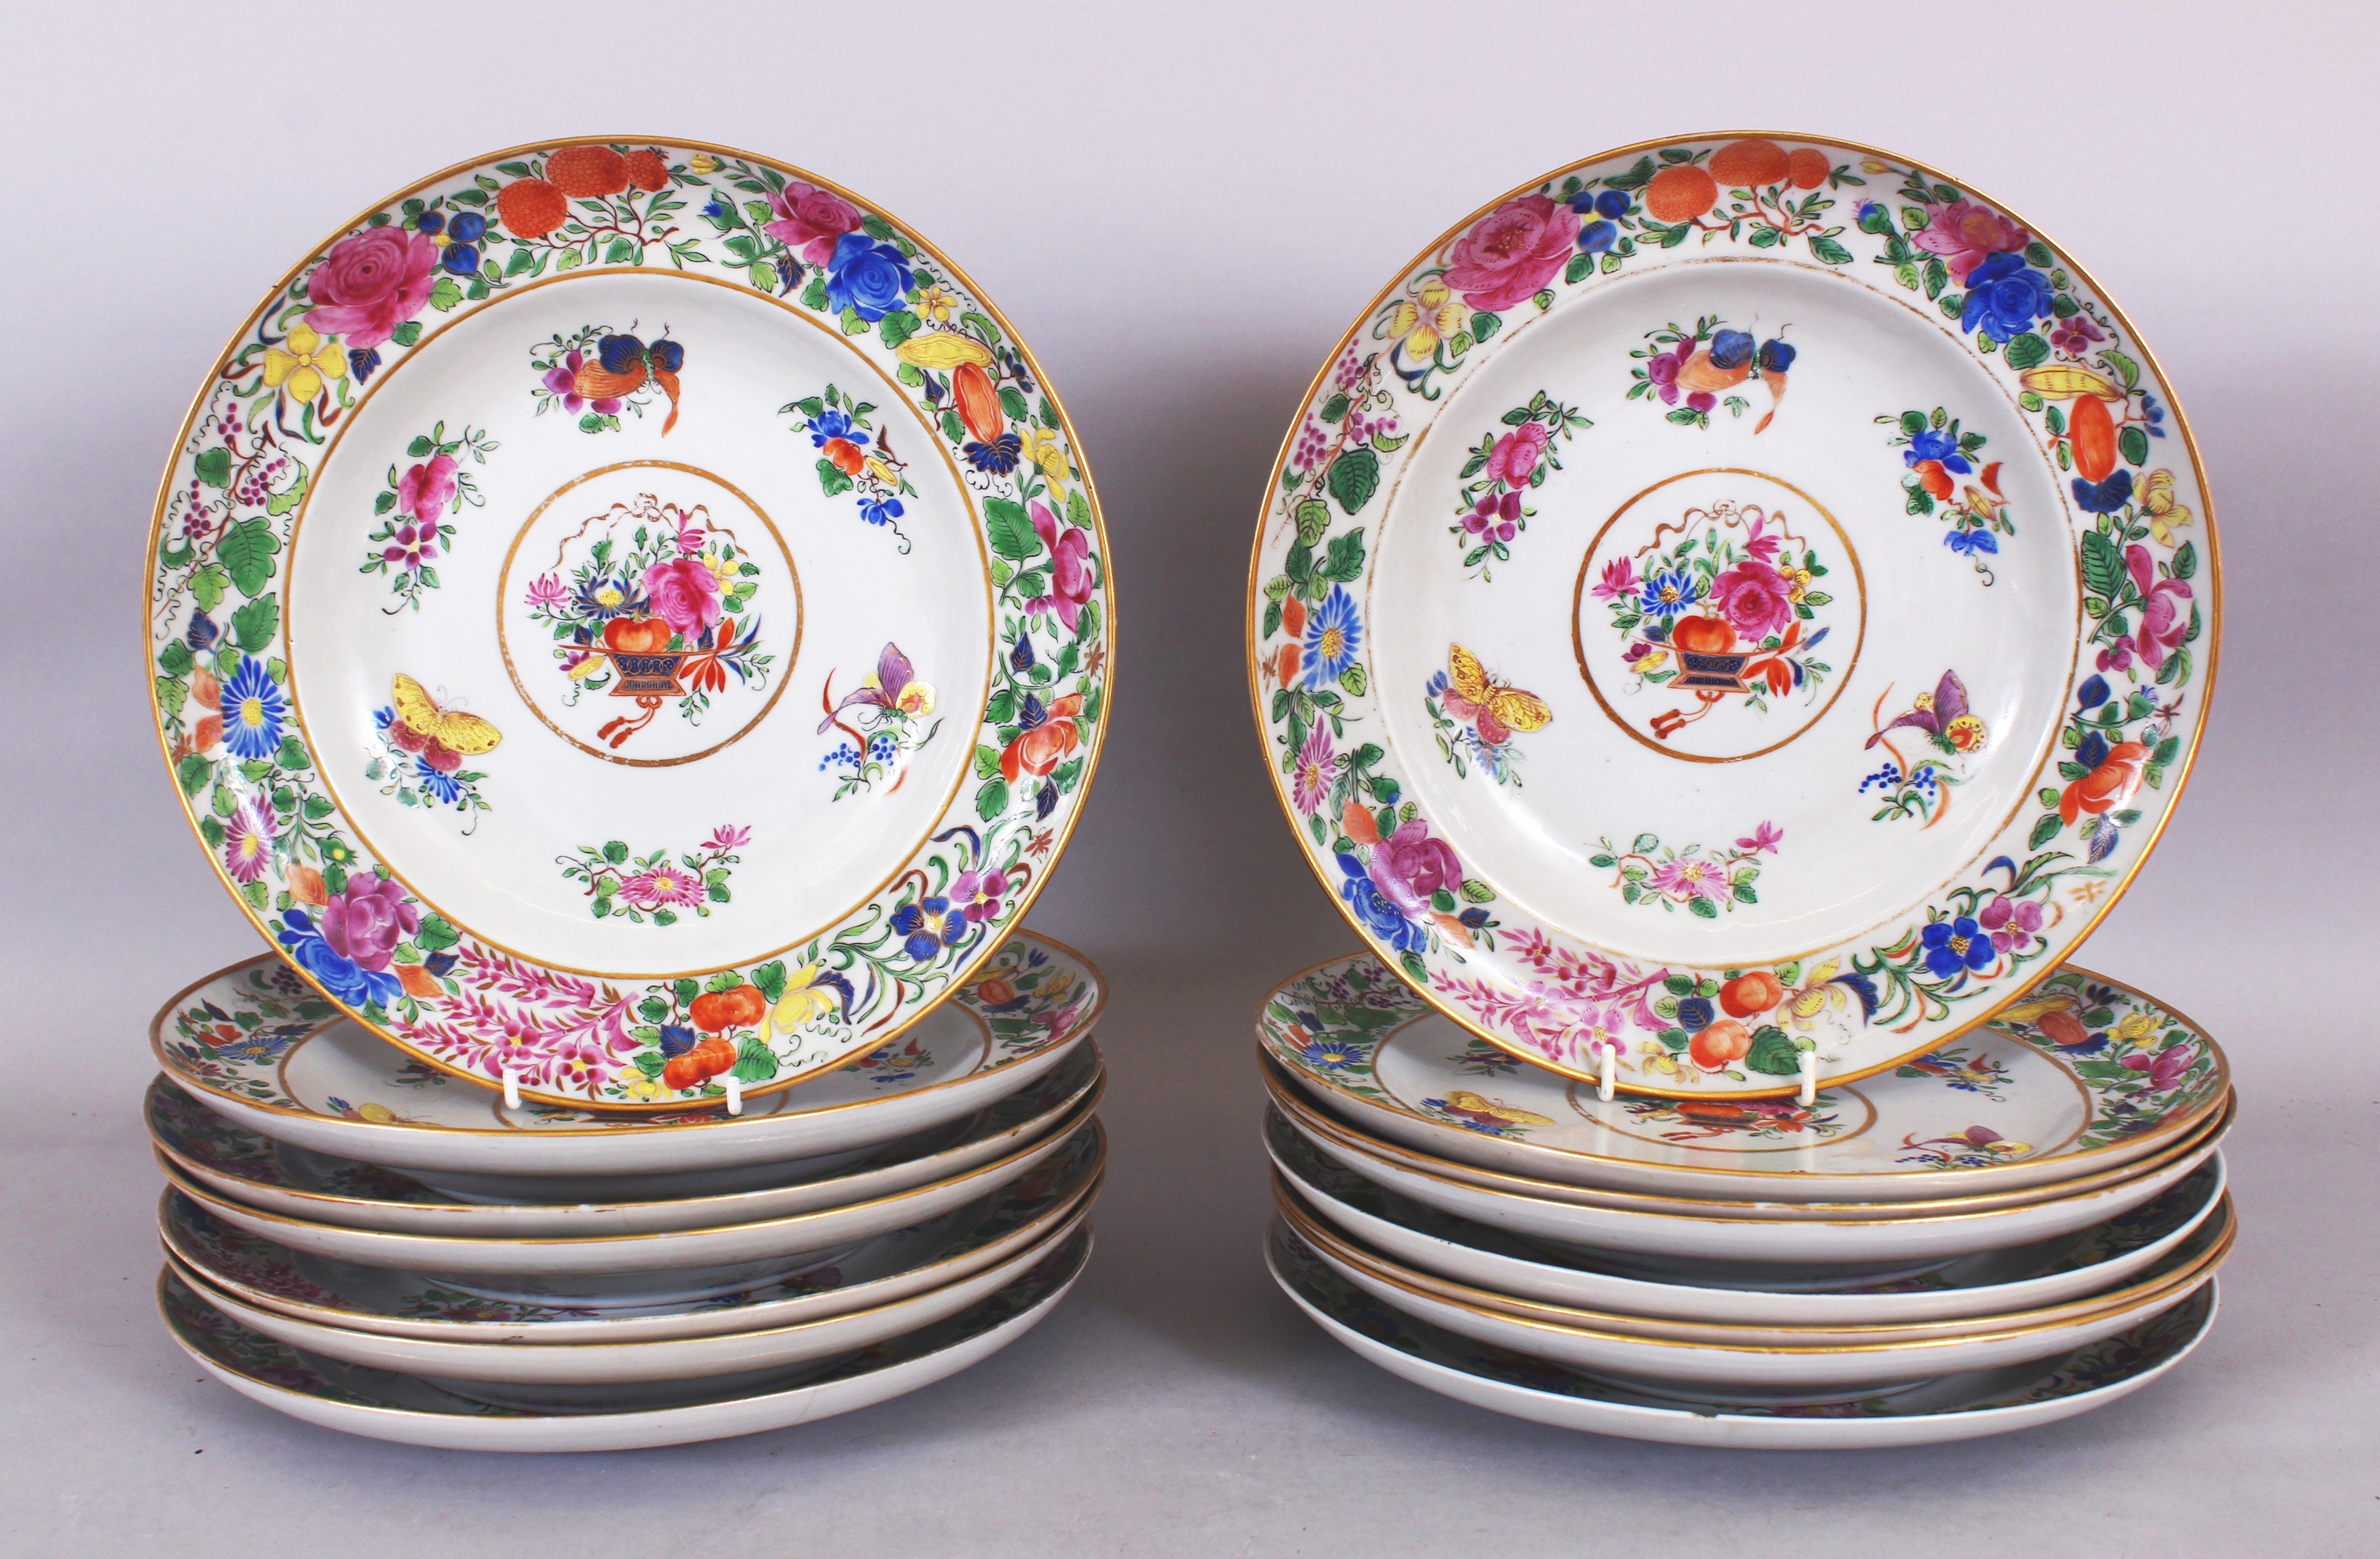 A GOOD GROUP OF FIFTEEN EARLY/MID 19TH CENTURY CHINESE CANTON PORCELAIN PLATES, each plate painted